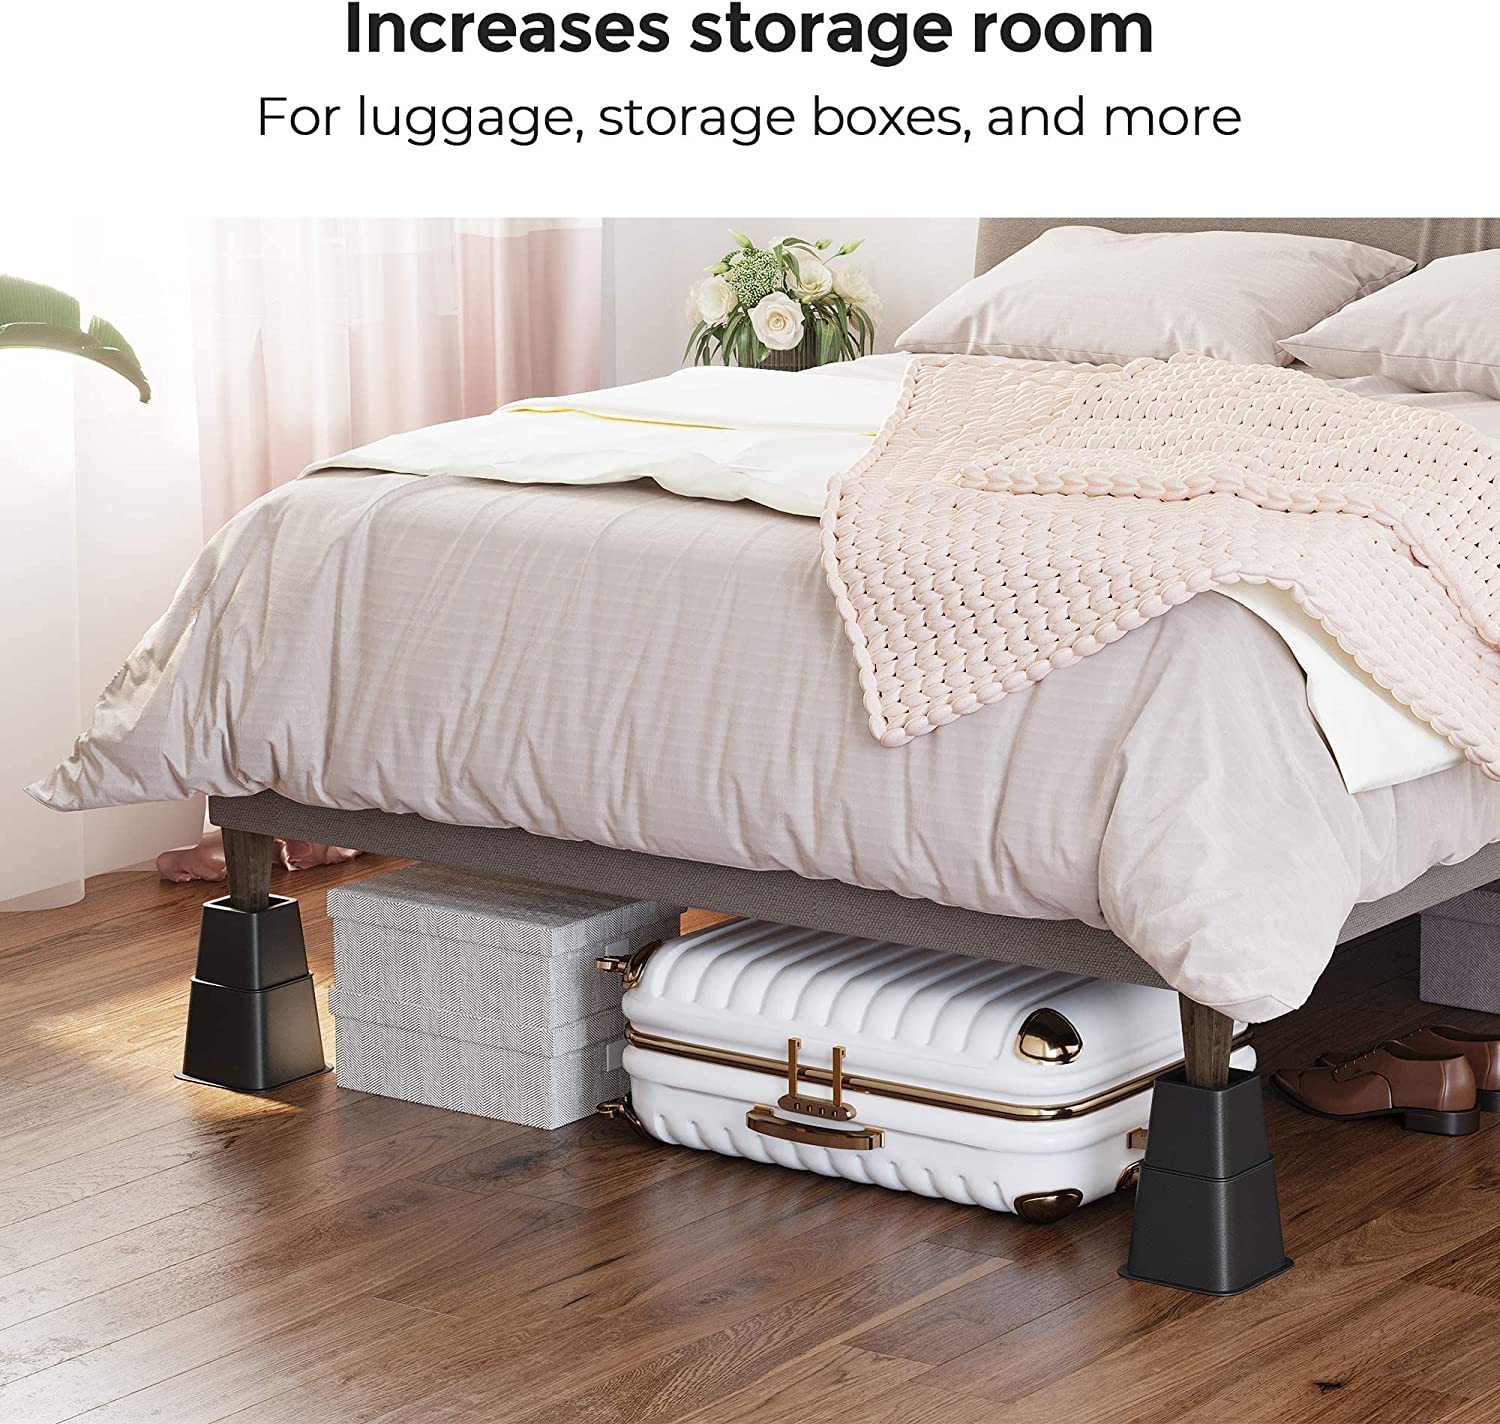 Bed Risers, 8-Pack Furniture Risers, Heavy Duty Bed Lifts in Heights of 3, 5 or 8 Inches